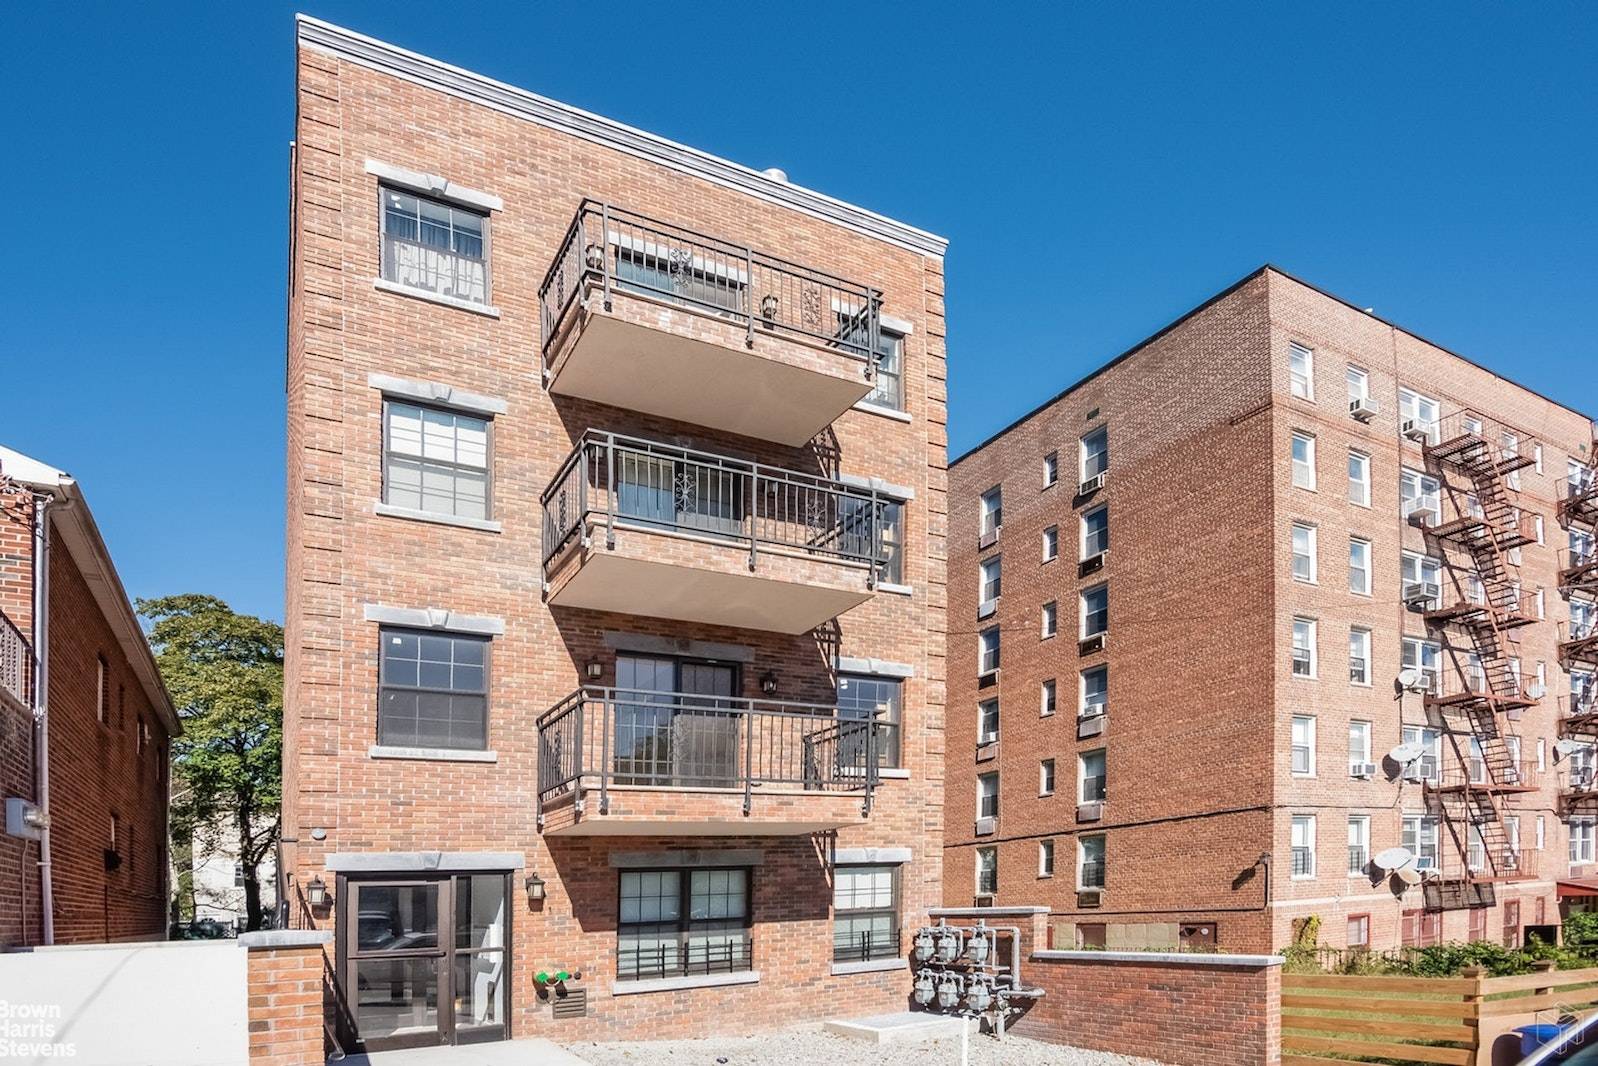 A solid investment opportunity awaits with this 5 story brick walk up, a 5 unit apartment building in Riverdale.